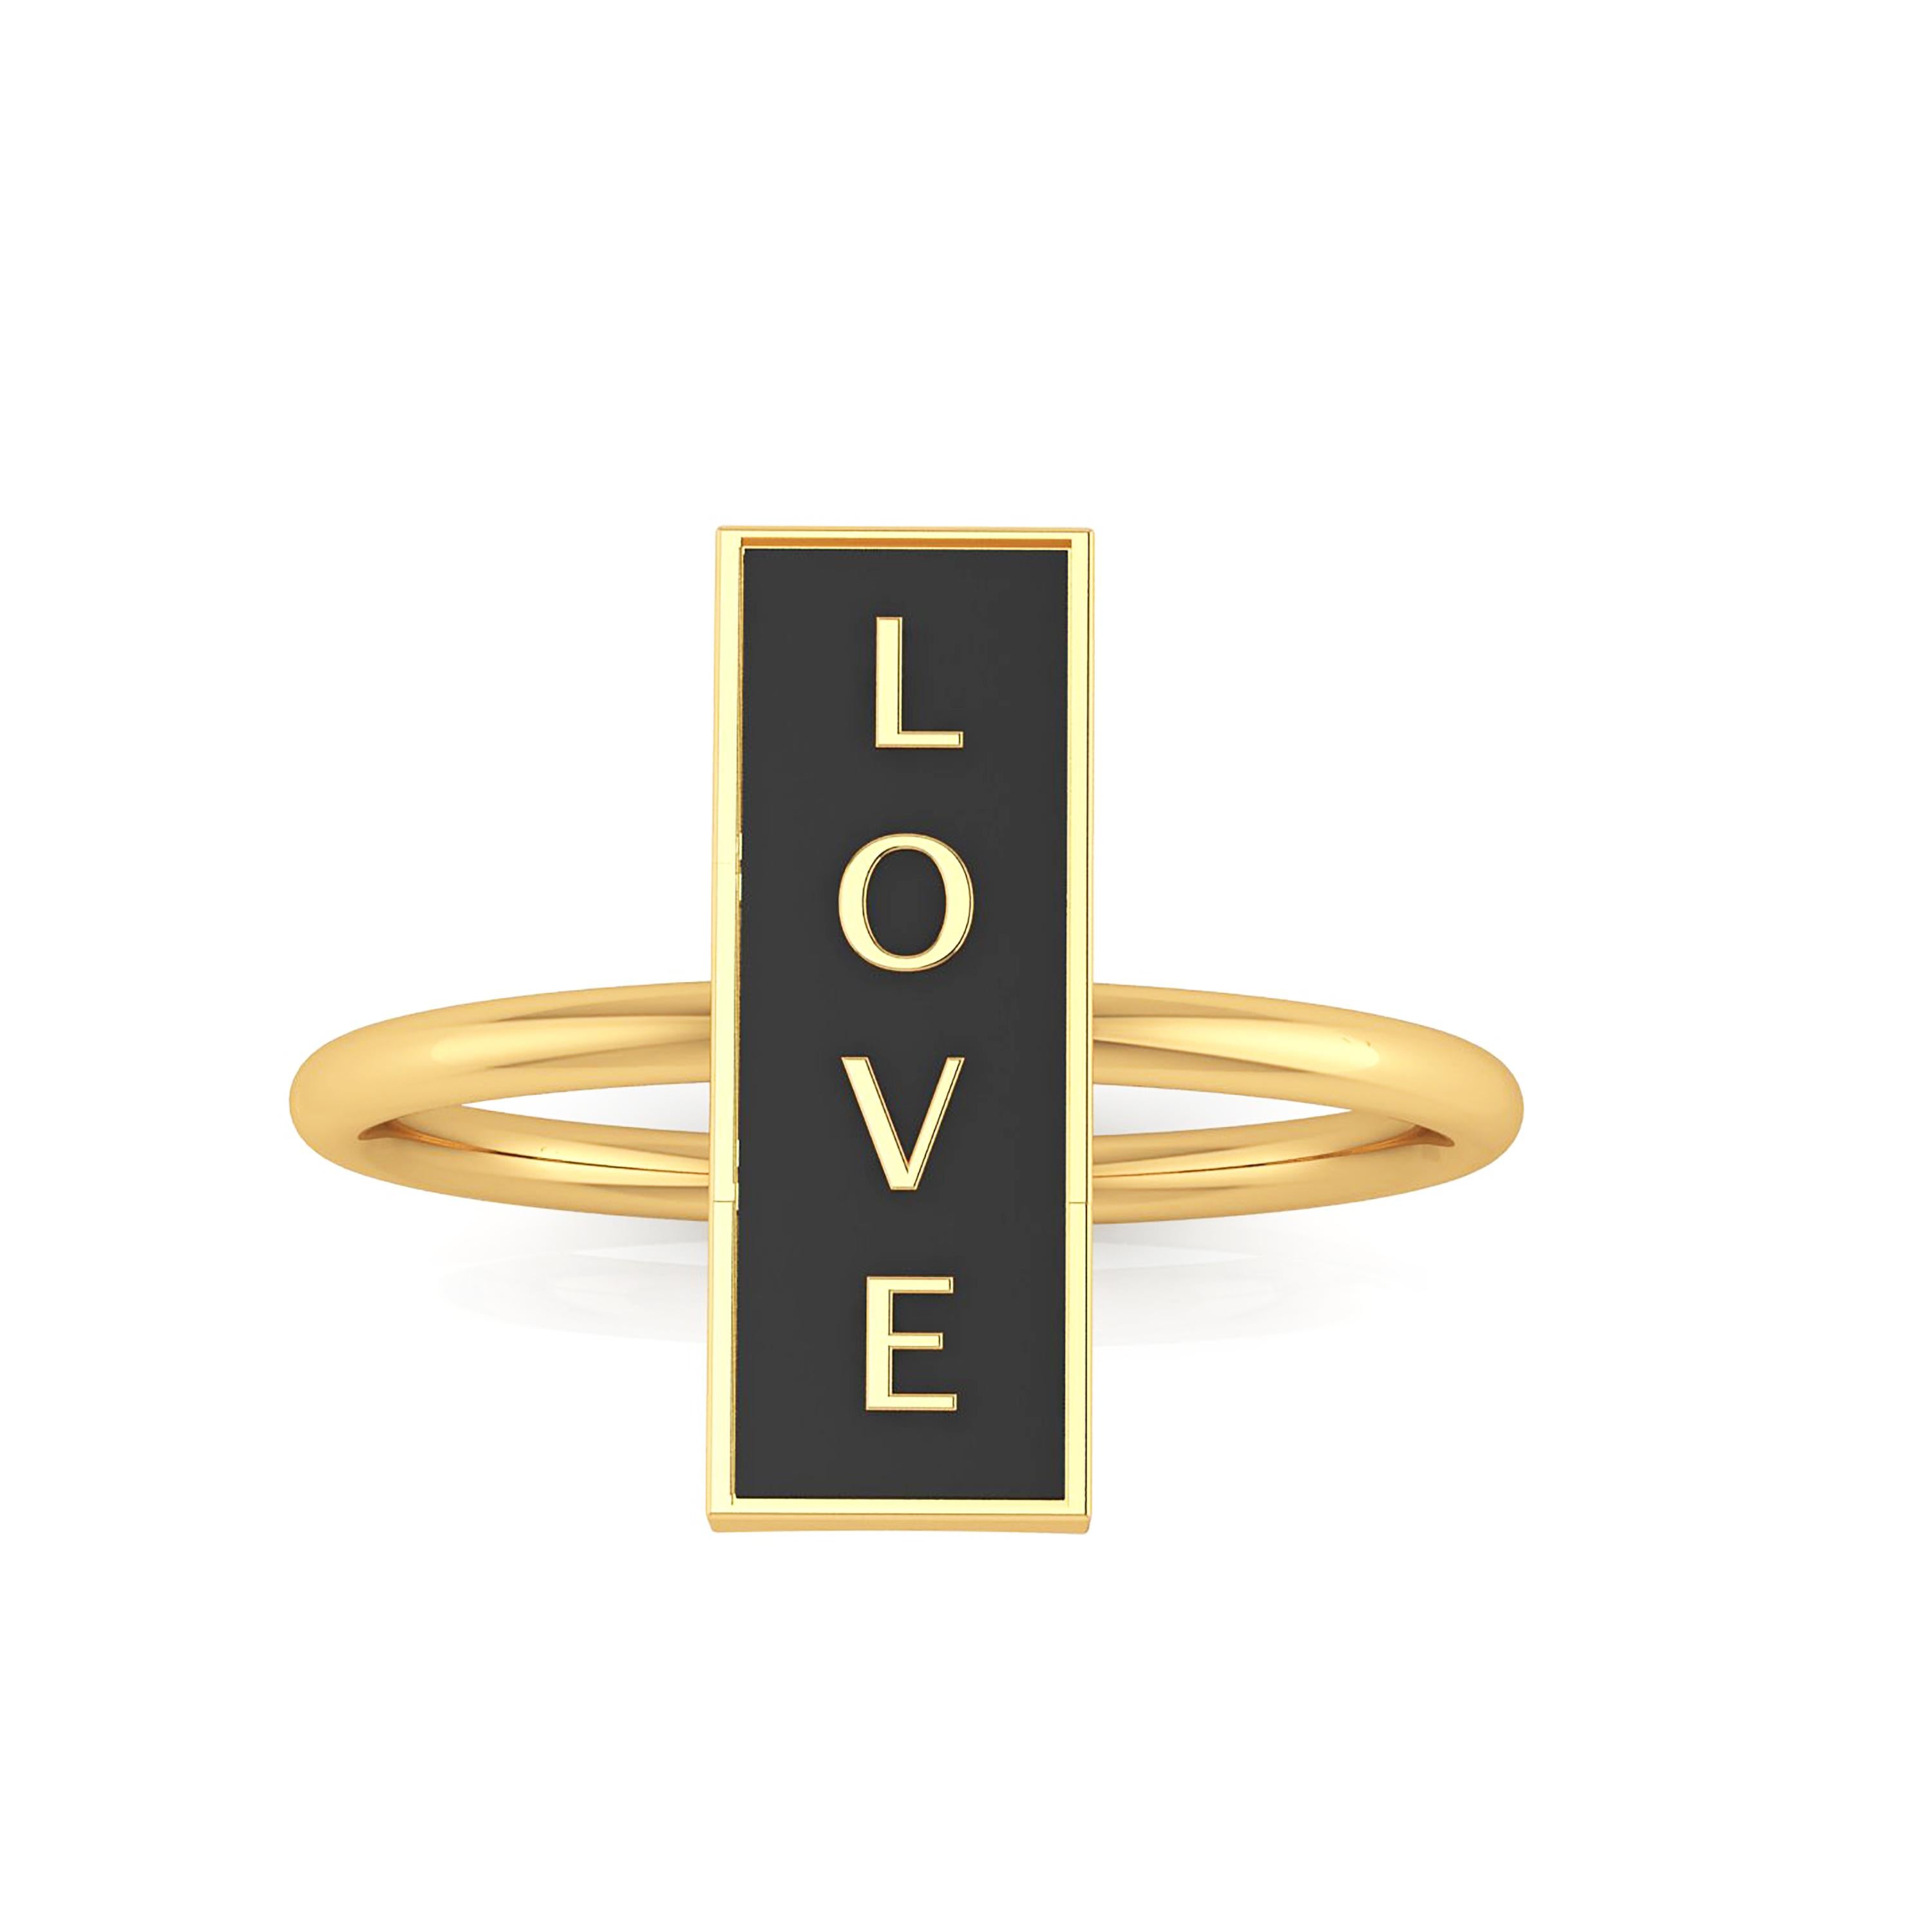 FERRUCCI The Love in black ring, conceived in 18k yellow gold, a new way to bring with you the classy, beautiful 18k yellow gold, everlasting in time, modern and bold shapes combined to create everlasting Love.
Size 6, complimentary sizing and